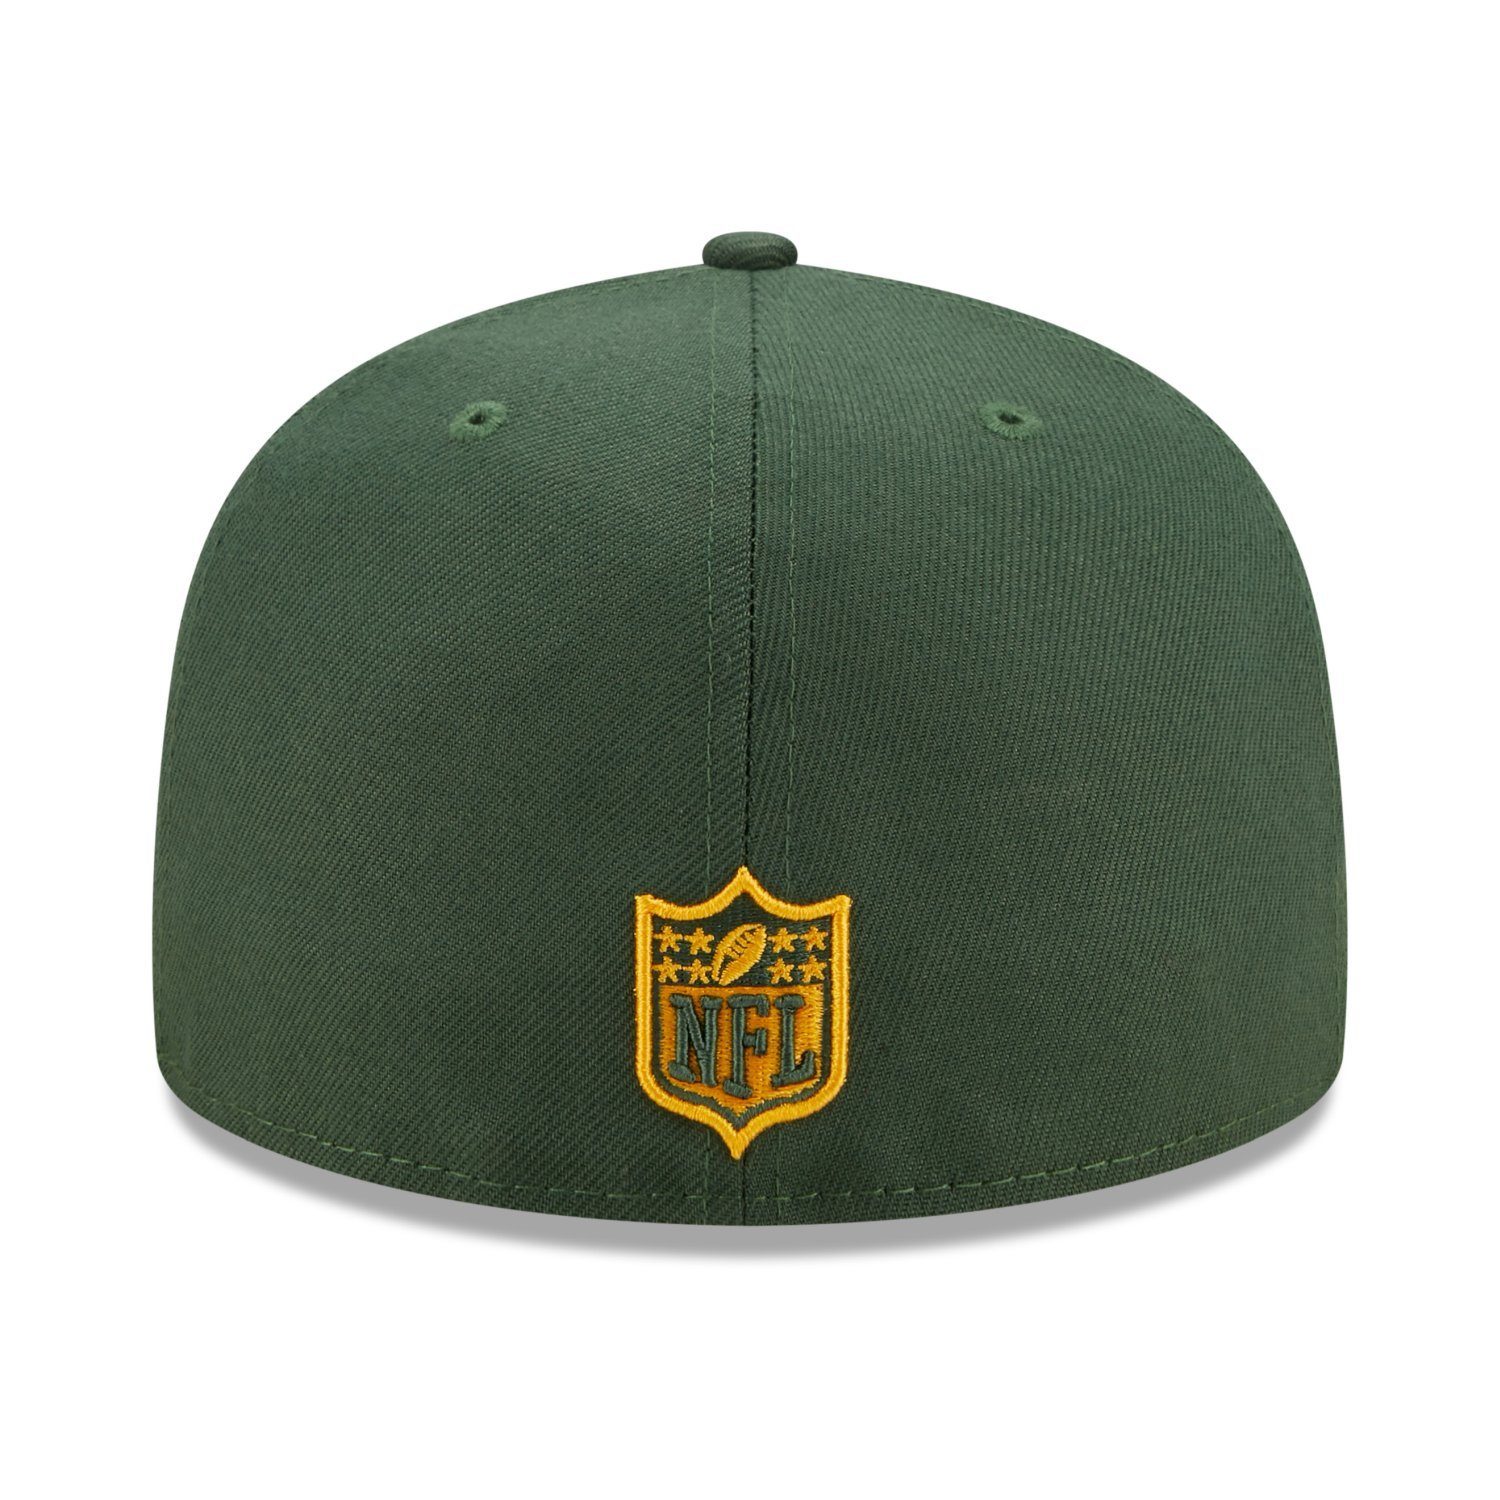 59Fifty Green Era New SIDE Packers PATCH Fitted Cap Bay